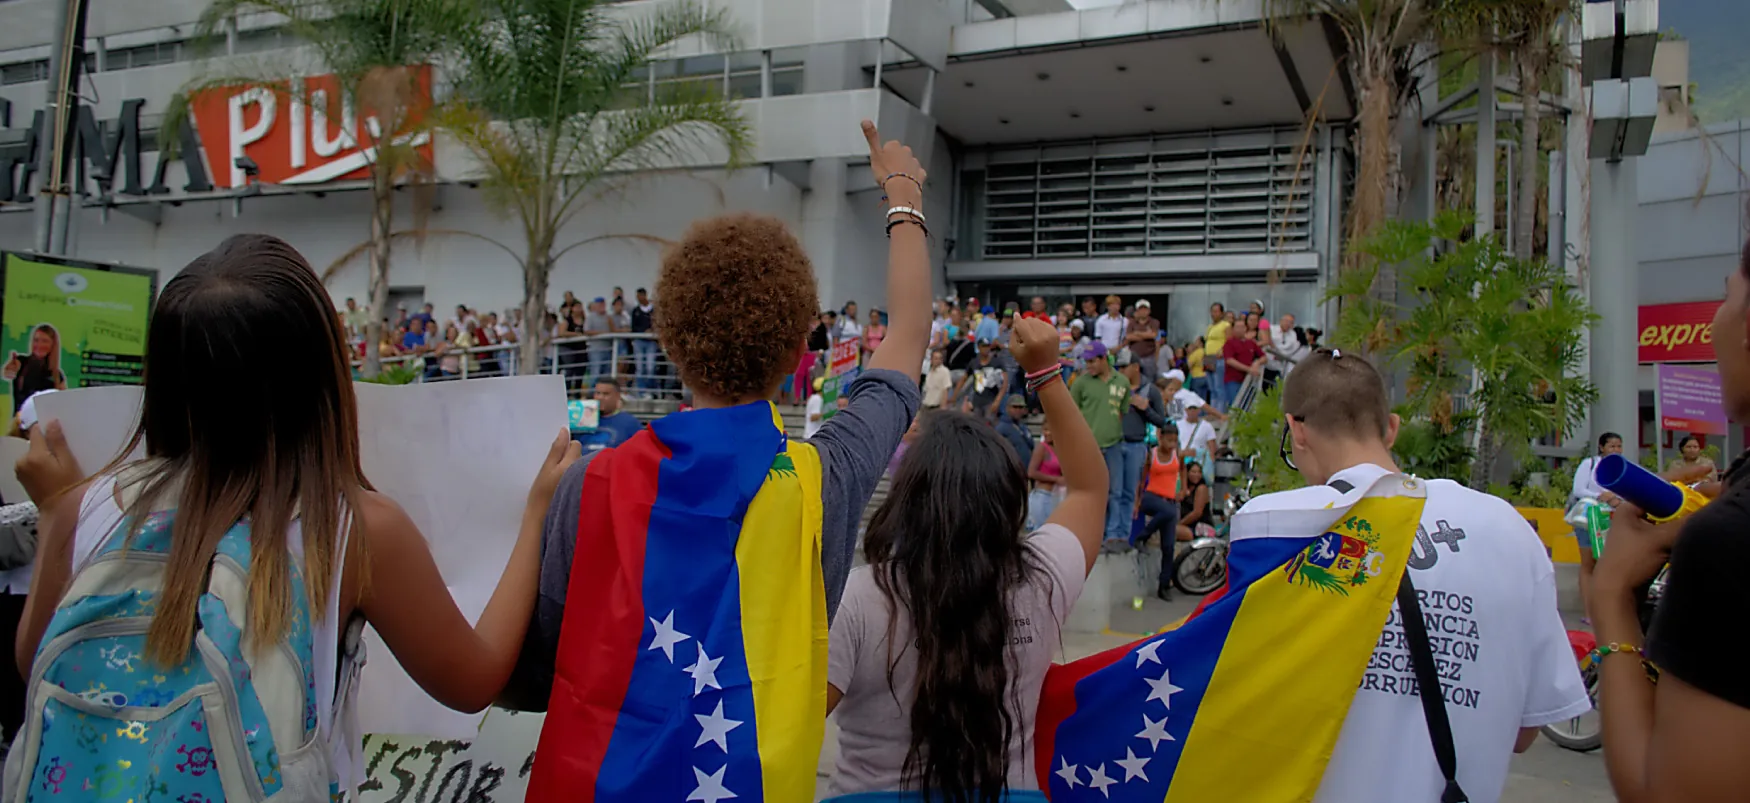 A large group of people gather outside a building by a palm tree. Some protesters hold signs; others have draped the Venezuelan flag around their shoulders.